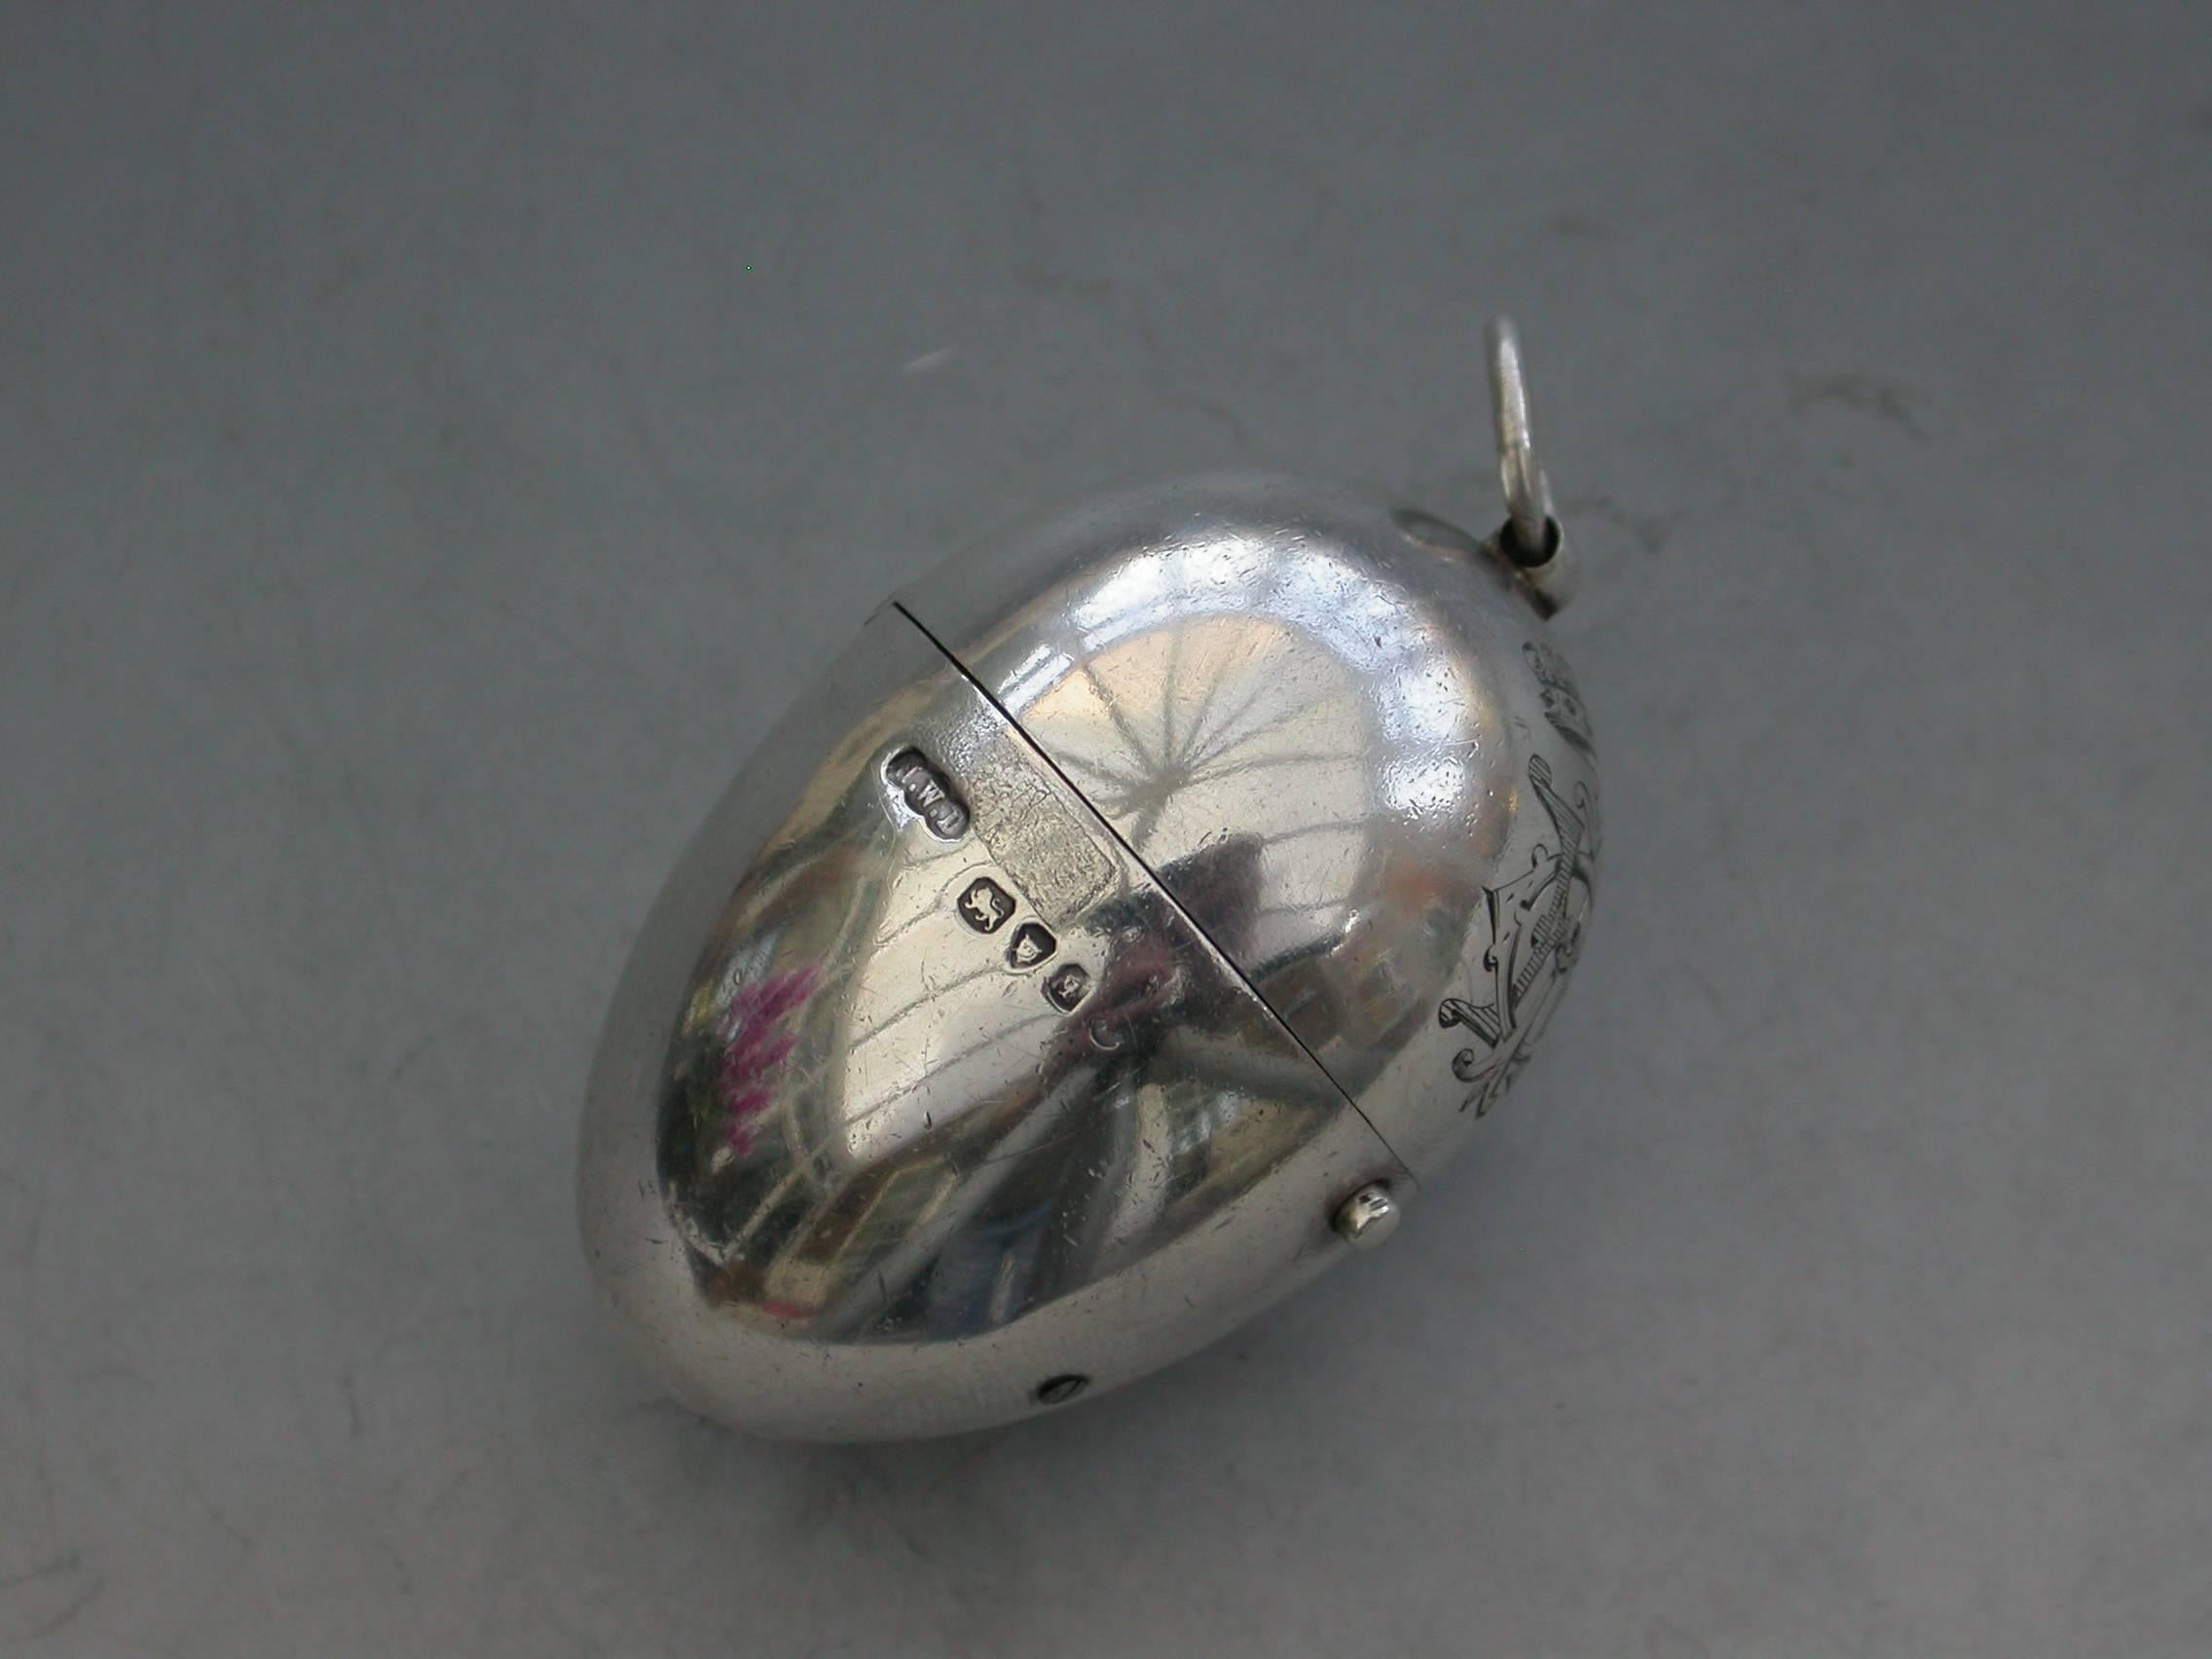 A very fine Victorian silver egg shaped Sewing Etui, the plain silver body engraved with a Viscount's Coronet and Cypher, a push button mechanism to the hinged lid opening to reveal the silver gilt interior complete with a contemporary silver